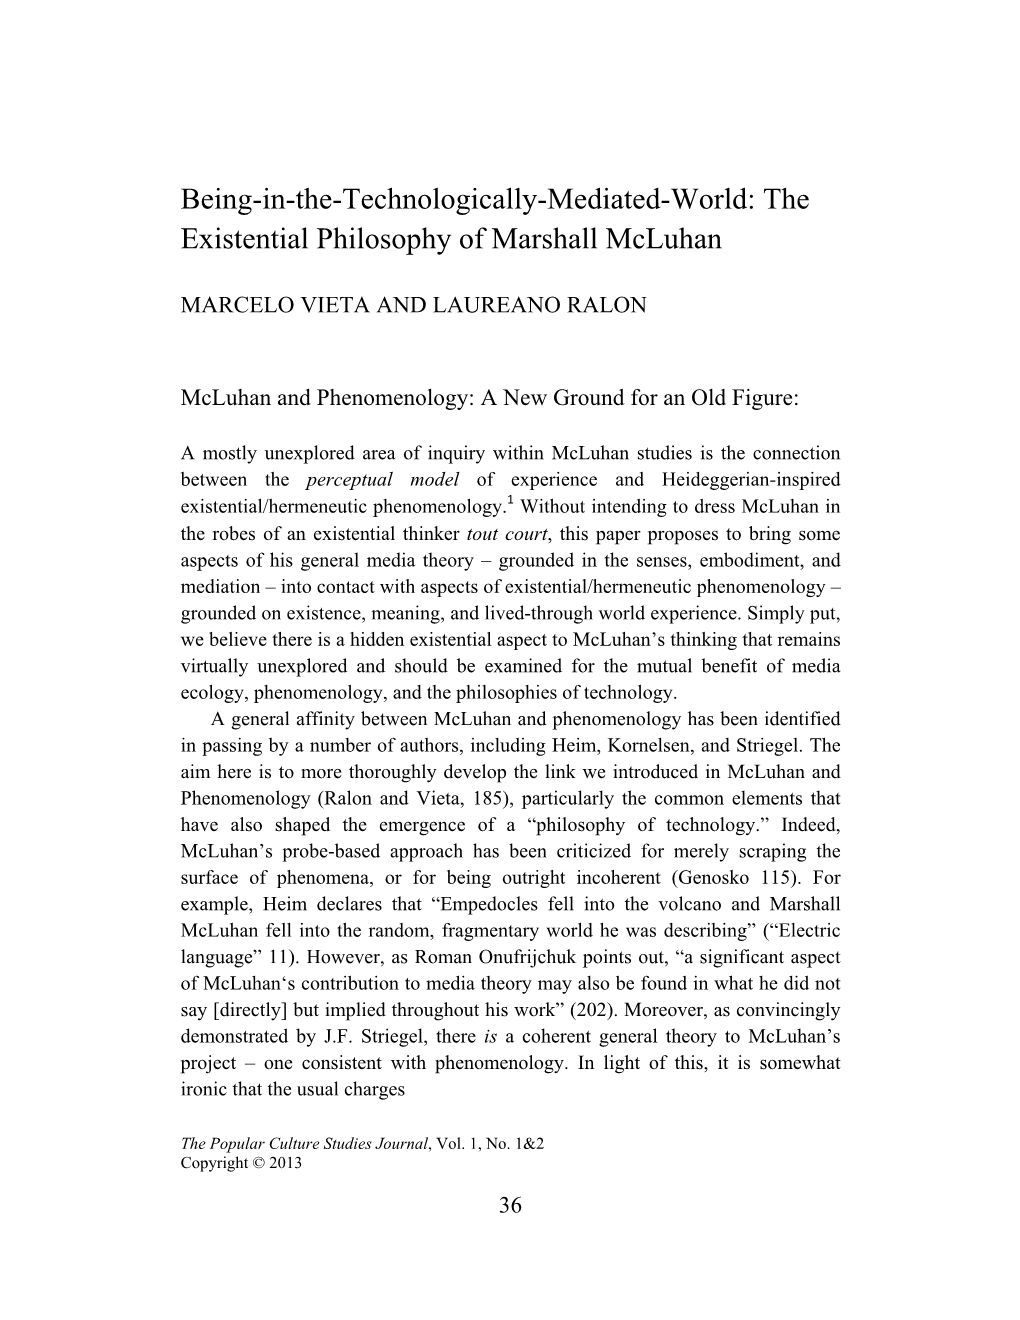 Being-In-The-Technologically-Mediated-World: the Existential Philosophy of Marshall Mcluhan